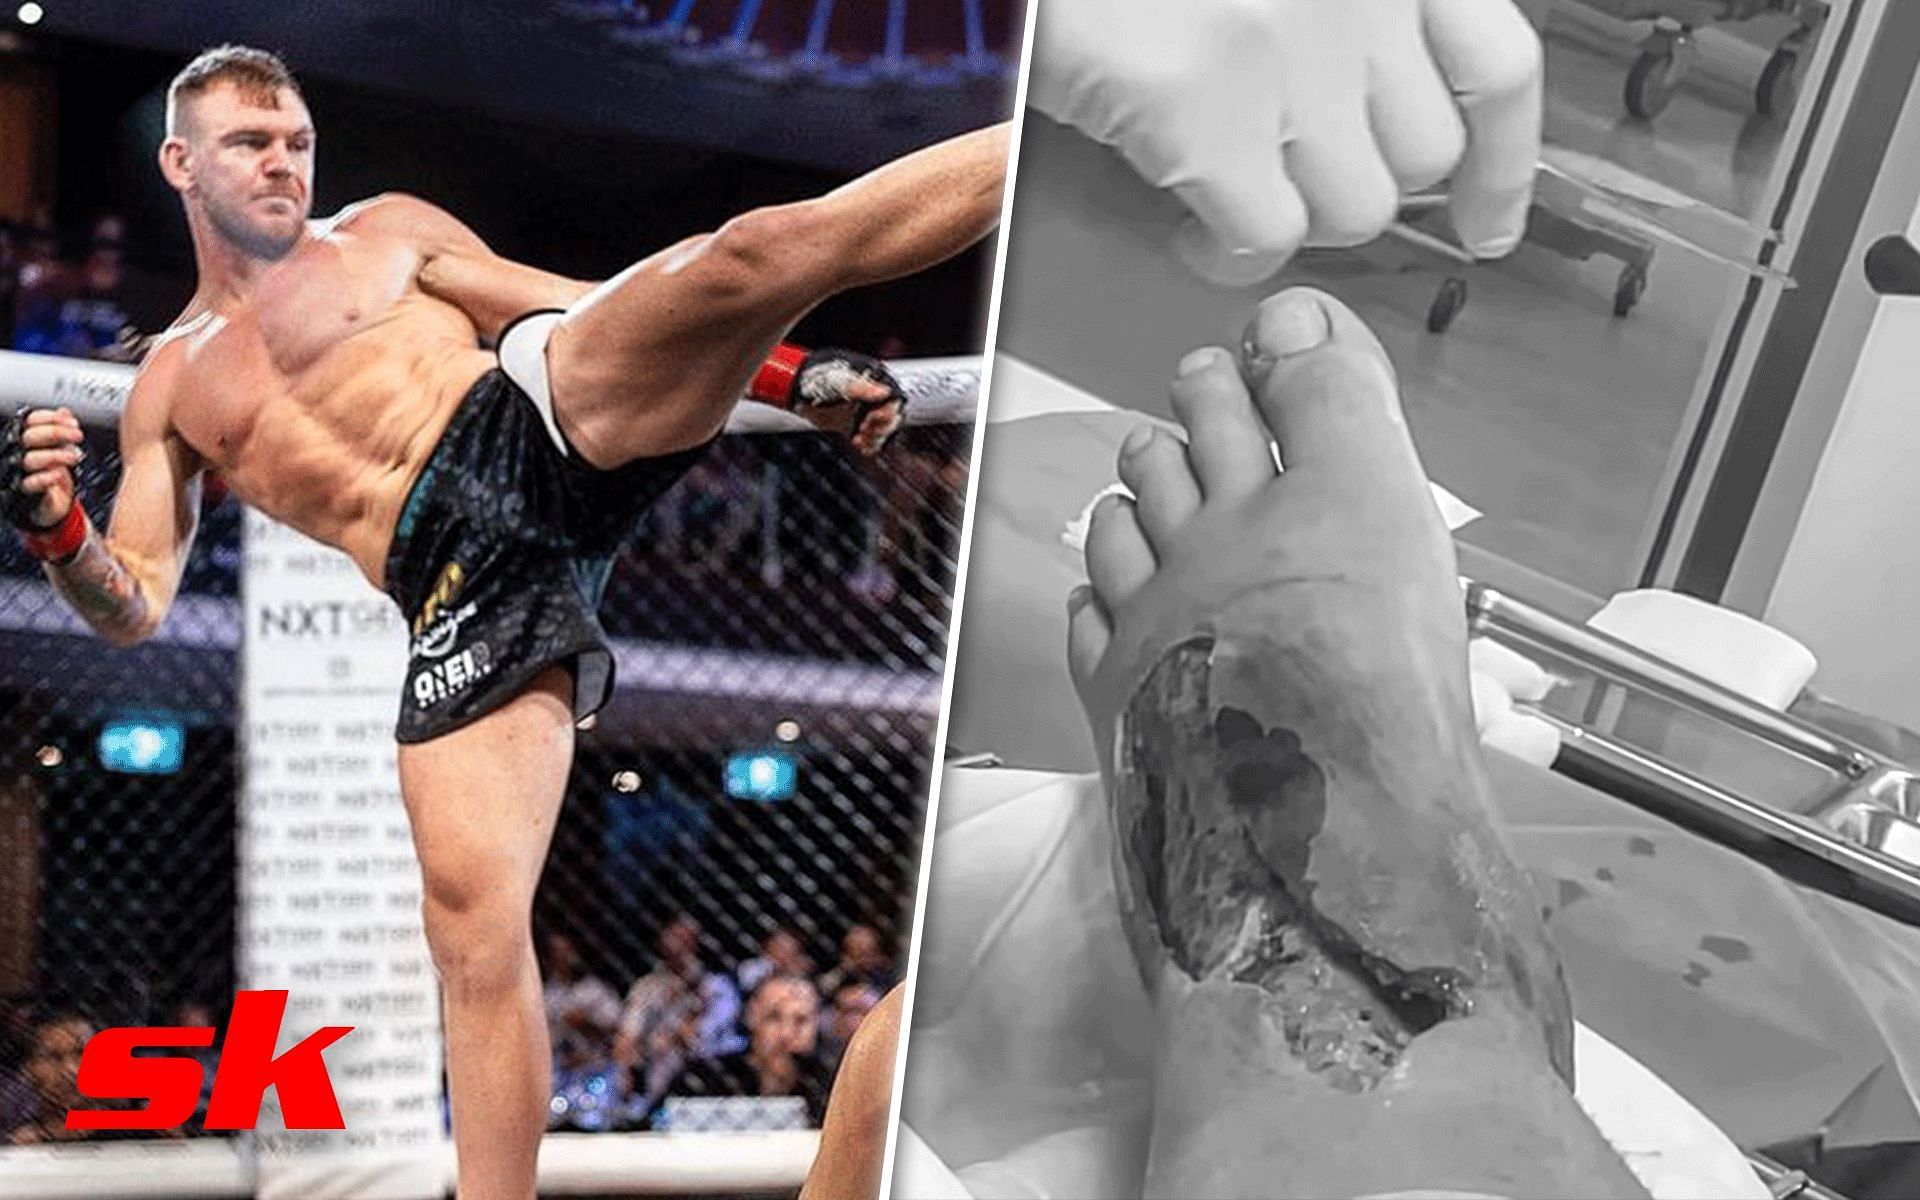 MMA fighter Tim Schultz staph infection [Images via @timbotmma on Instagram]